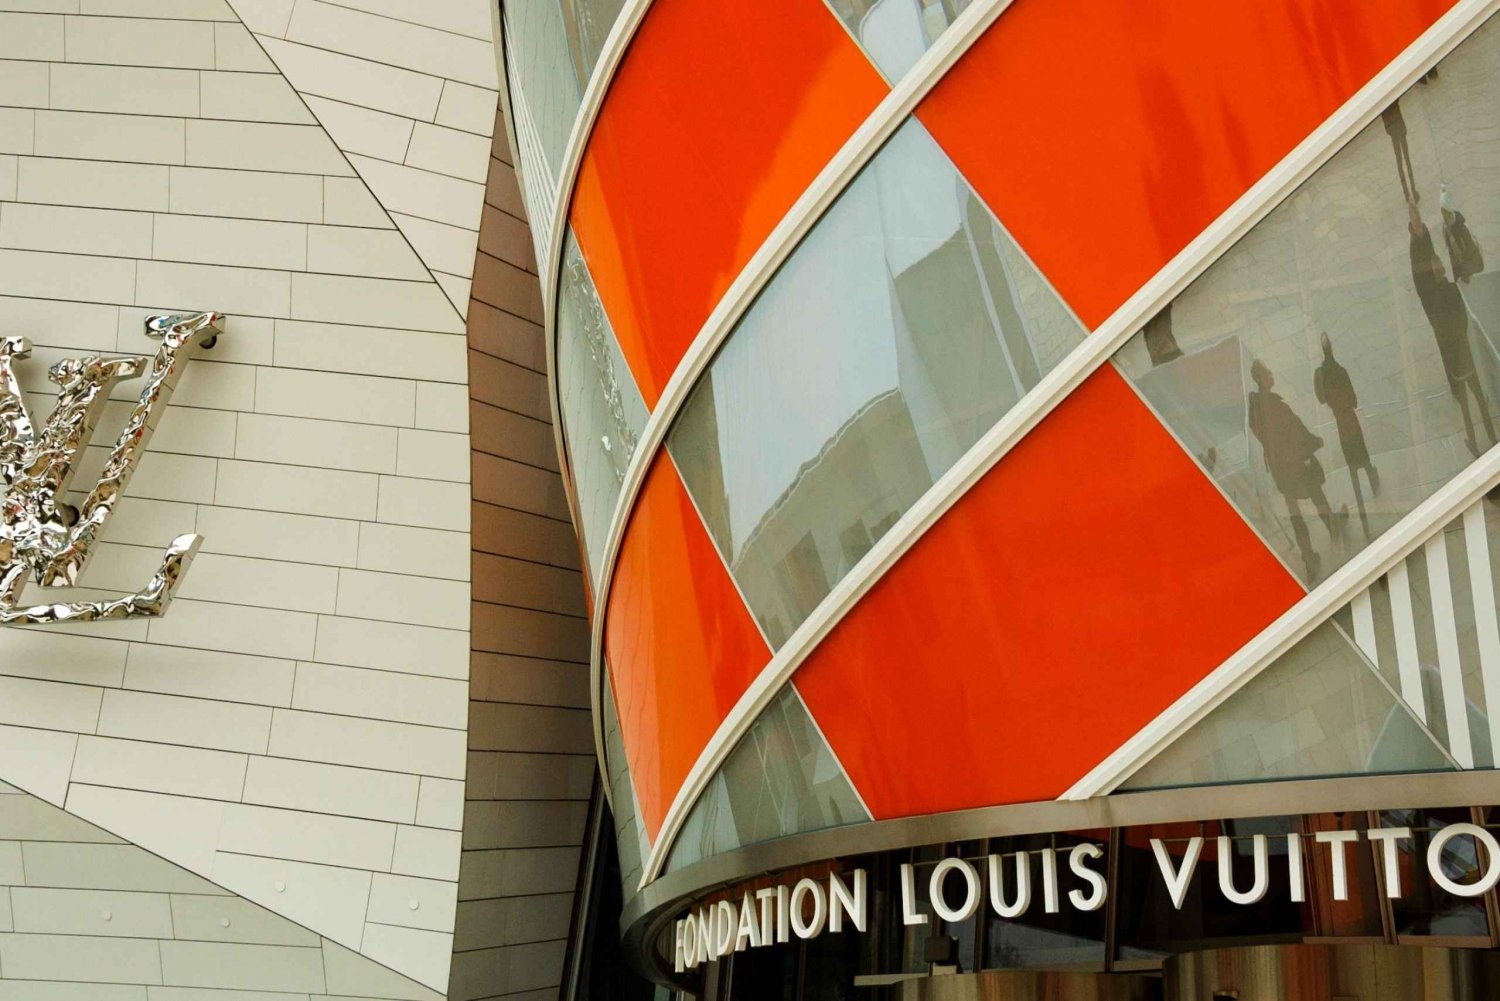 Louis Vuitton Foundation Premium Experience - Entry Included